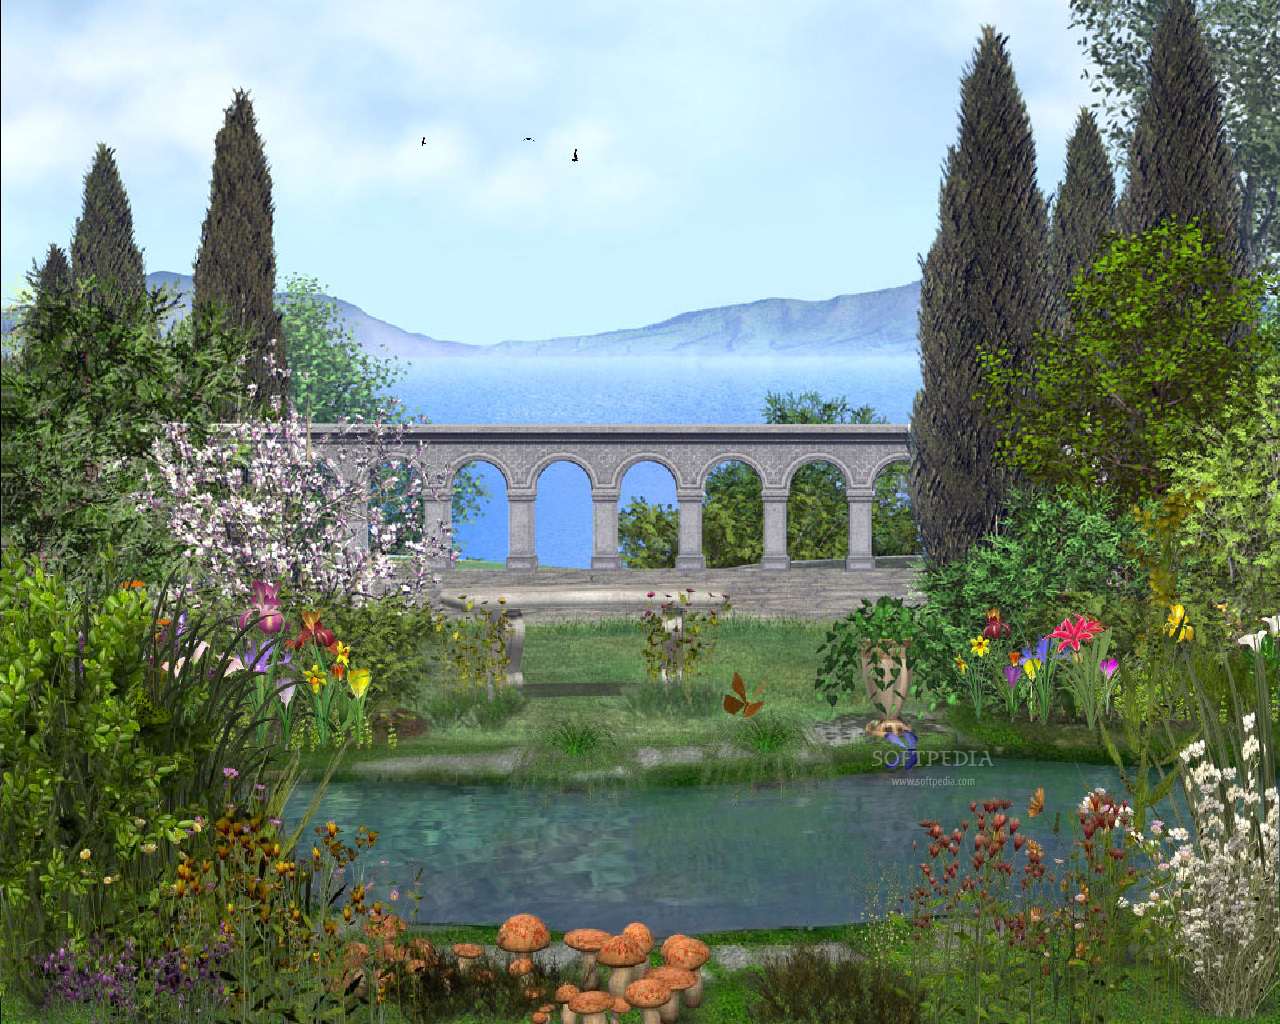 Garden Animated Screensaver This Is The Image Displayed By